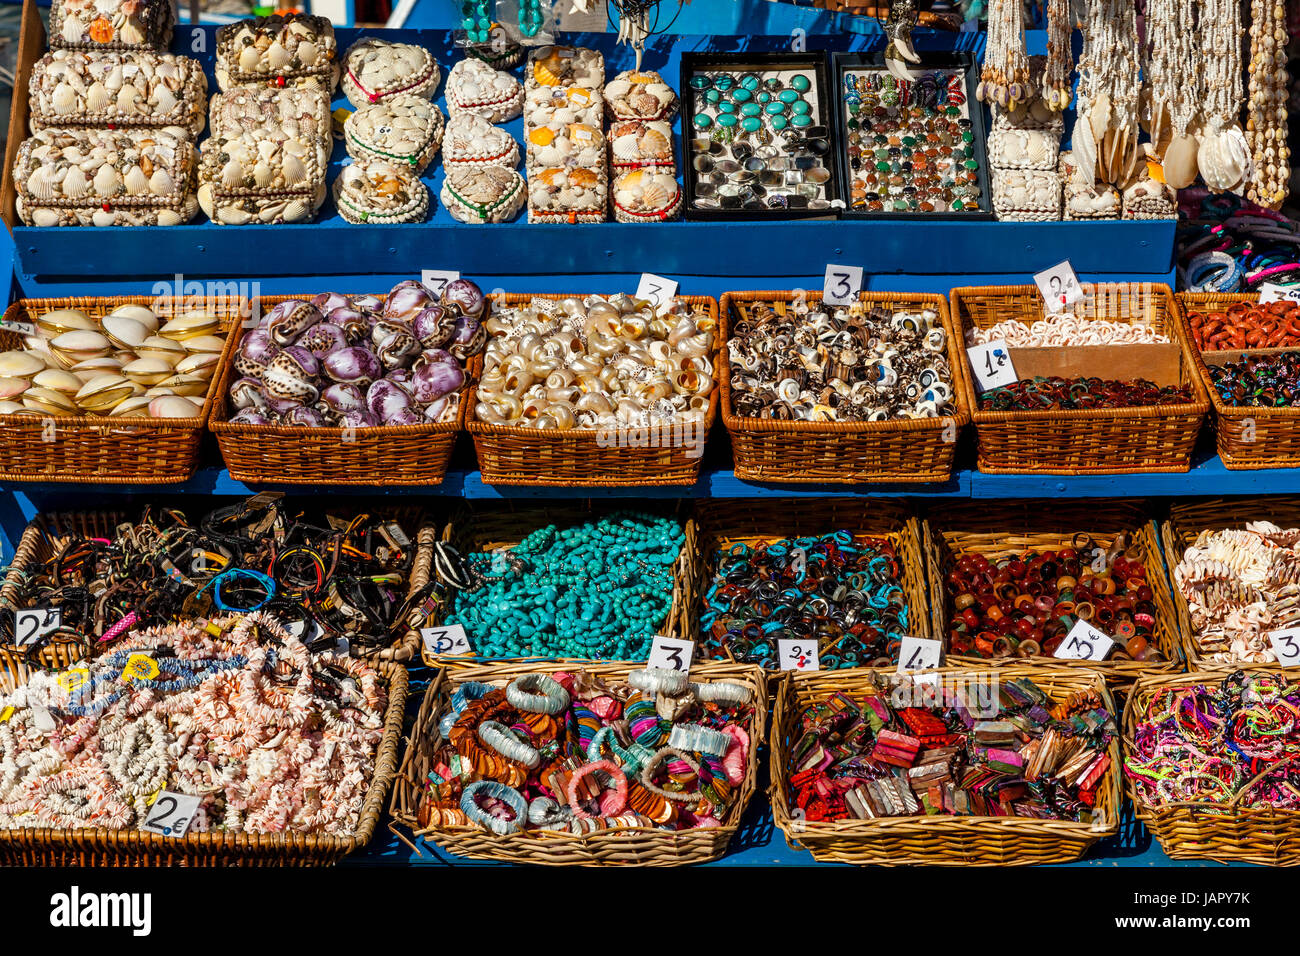 Colourful Souvenirs For Sale On A Boat In The Harbour, Rhodes Town, Rhodes, Greece Stock Photo